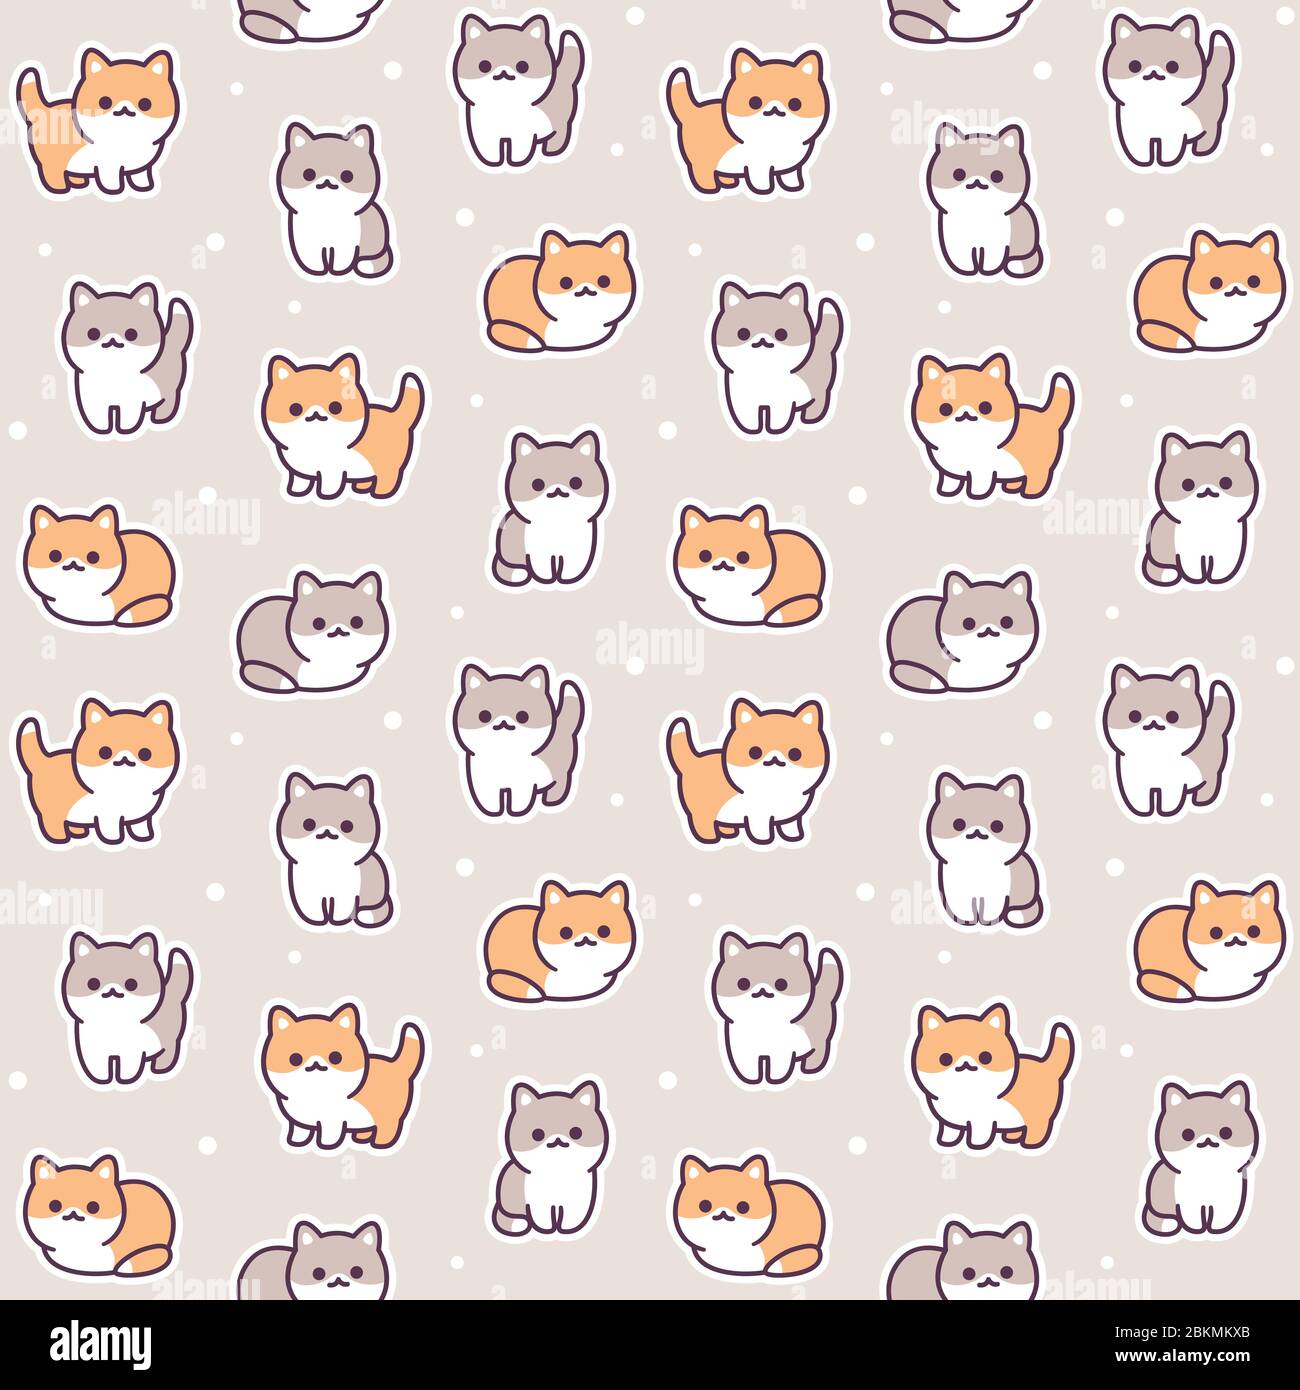 Tiny Baby Kittens Seamless Pattern Adorable Little Cats Background